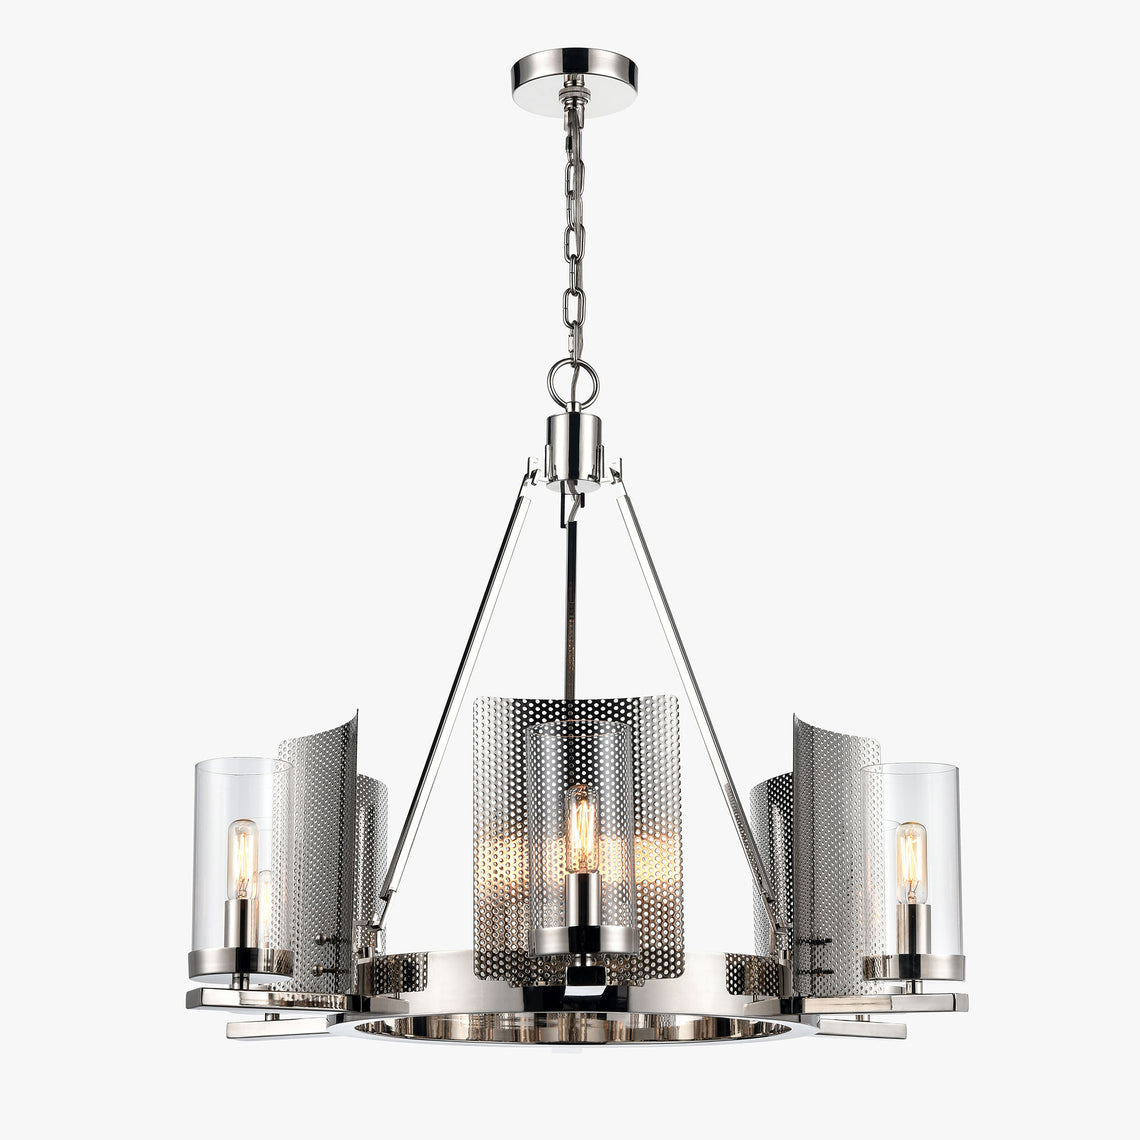 6-Light Chandeliers Chrome Finish with Clear glass, E12 Base